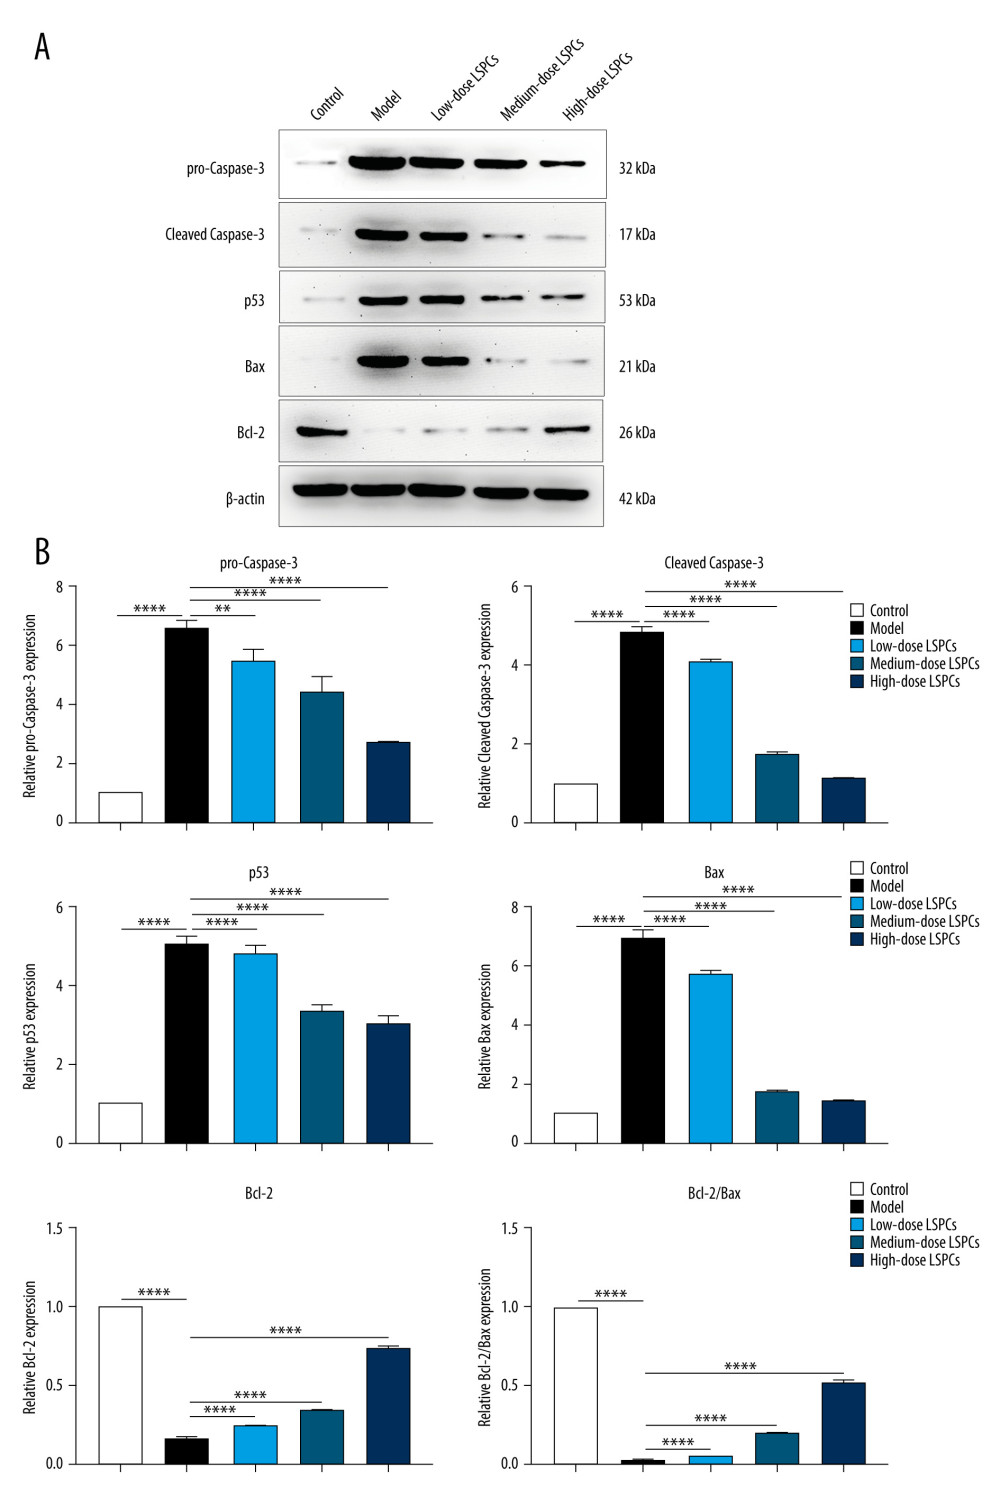 Treatment of LSPCs alleviated light exposure-induced cell apoptosis in retina. (A) Representative photos of western blotting for pro-Caspase-3, cleaved Caspase-3, p53, Bax as well as Bcl-2 proteins. (B) Quantification of the expressions of pro-Caspase-3, cleaved Caspase-3, p53, Bax, and Bcl-2 as well as Bcl-2/Bax ratio in retina from control, light-induced retinal damage model, low-, medium-, and high-dose LSPCs groups. ** P<0.01; **** P<0.0001. GraphPad Prism software (version 8.0.1; Graph Pad; San Diego, CA, USA) was used to create the pictures.